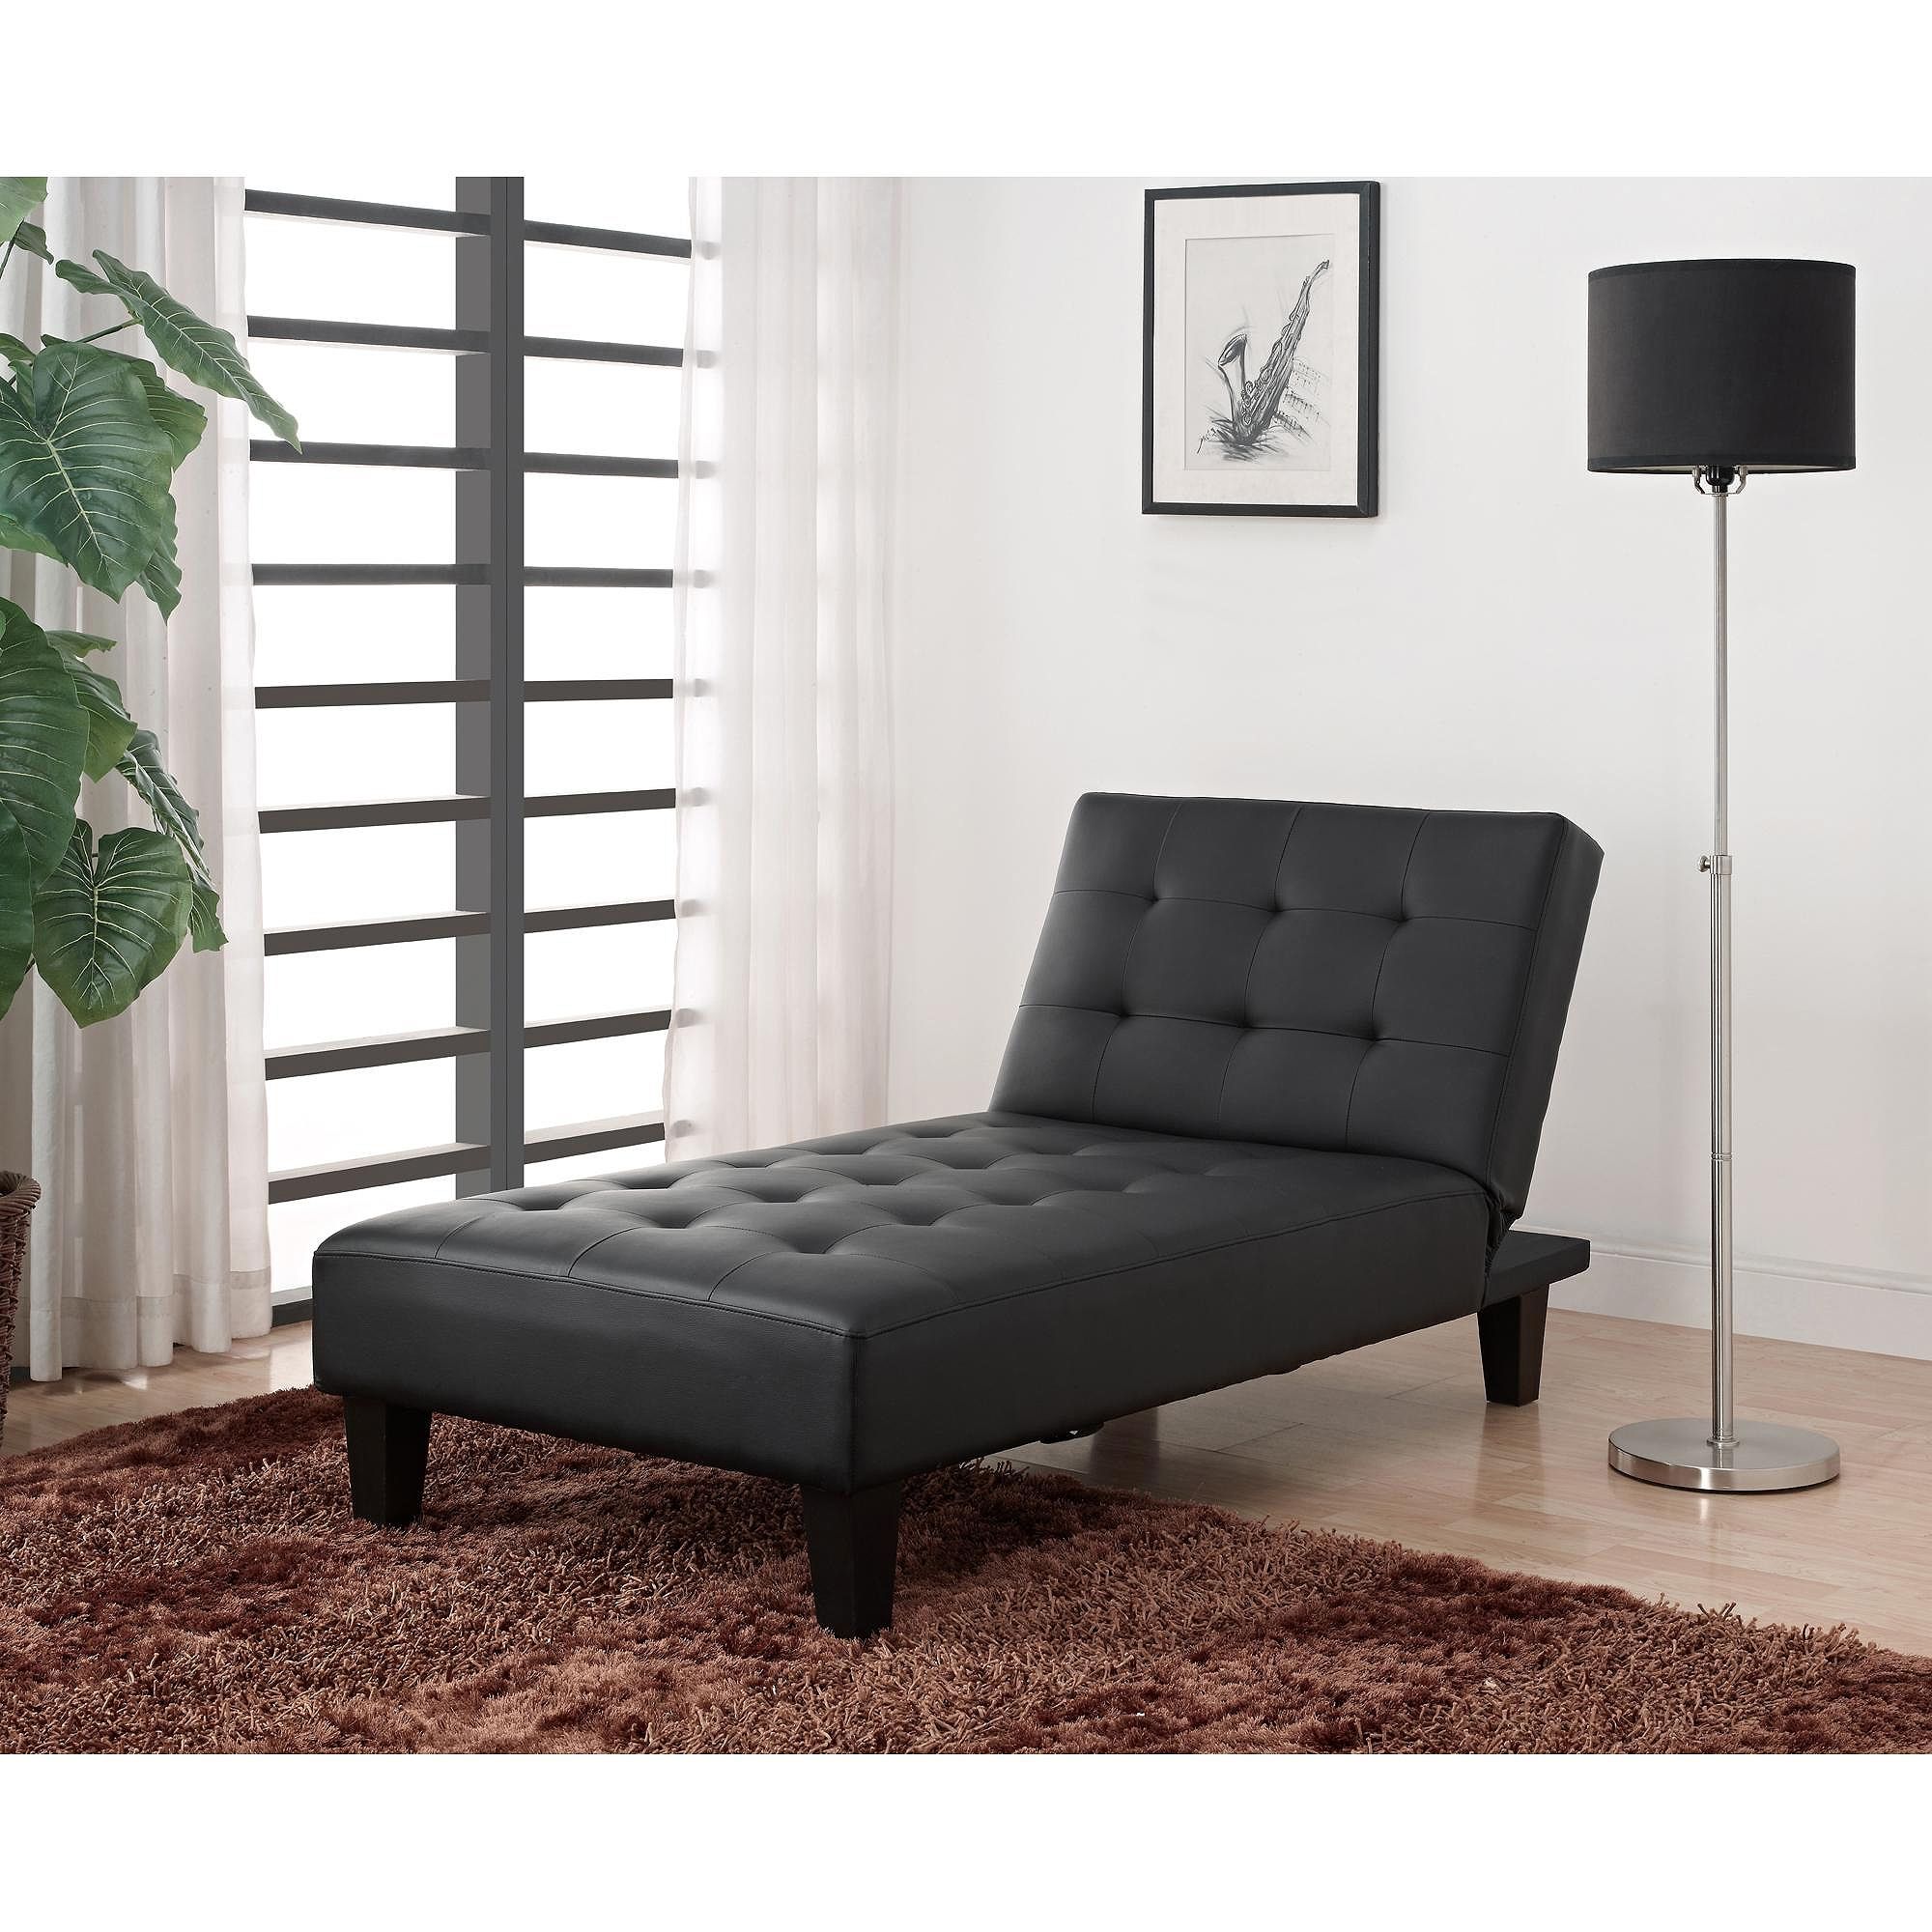 Preferred Julia Futon Chaise Lounger, Black – Walmart Inside Futons With Chaise Lounge (View 1 of 15)